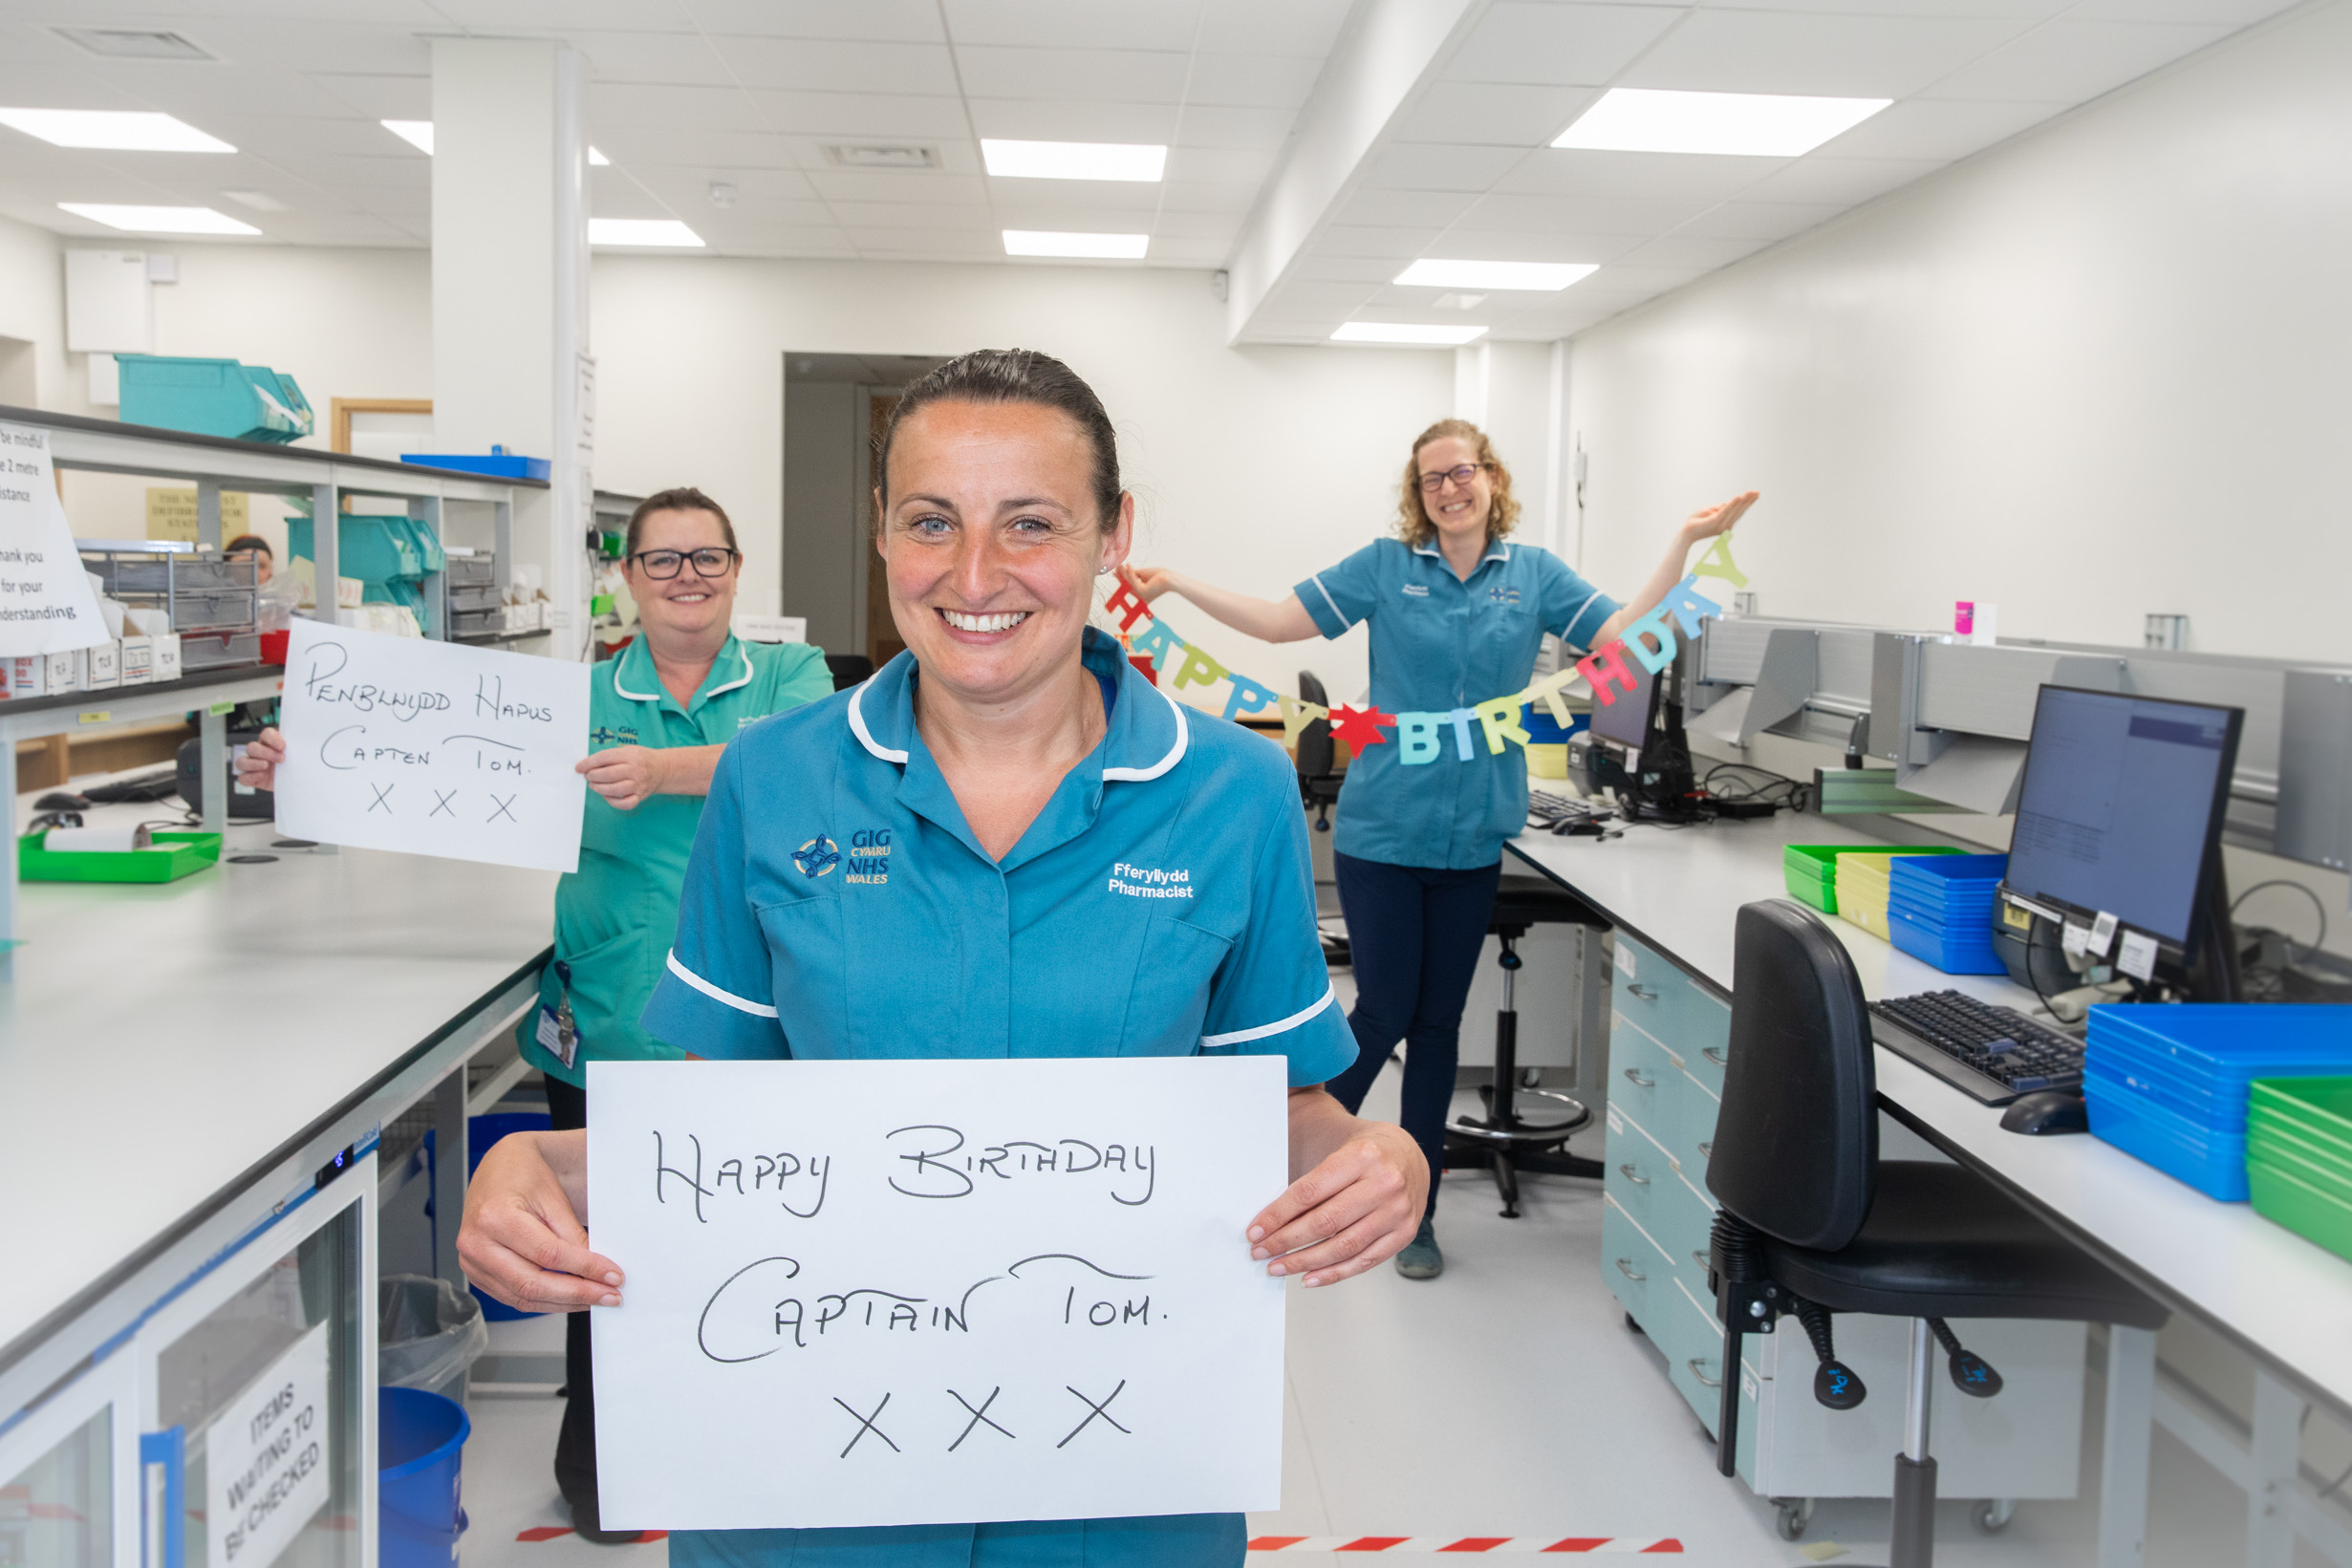 Welsh NHS staff send birthday wishes to Colonel Tom – in song of course